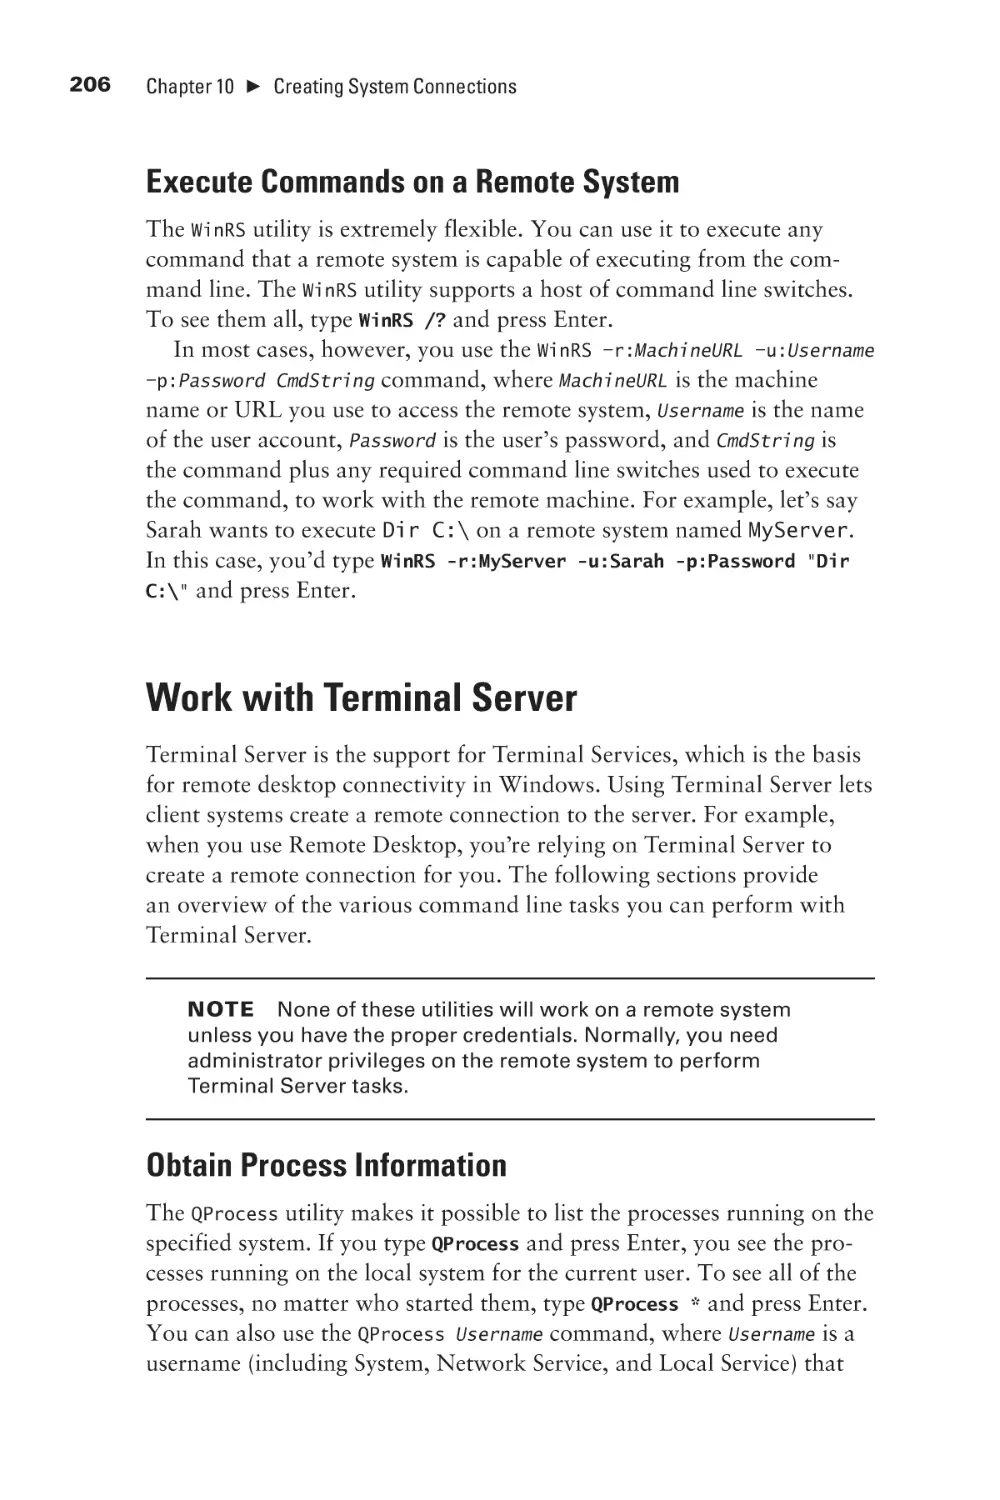 Work with Terminal Server